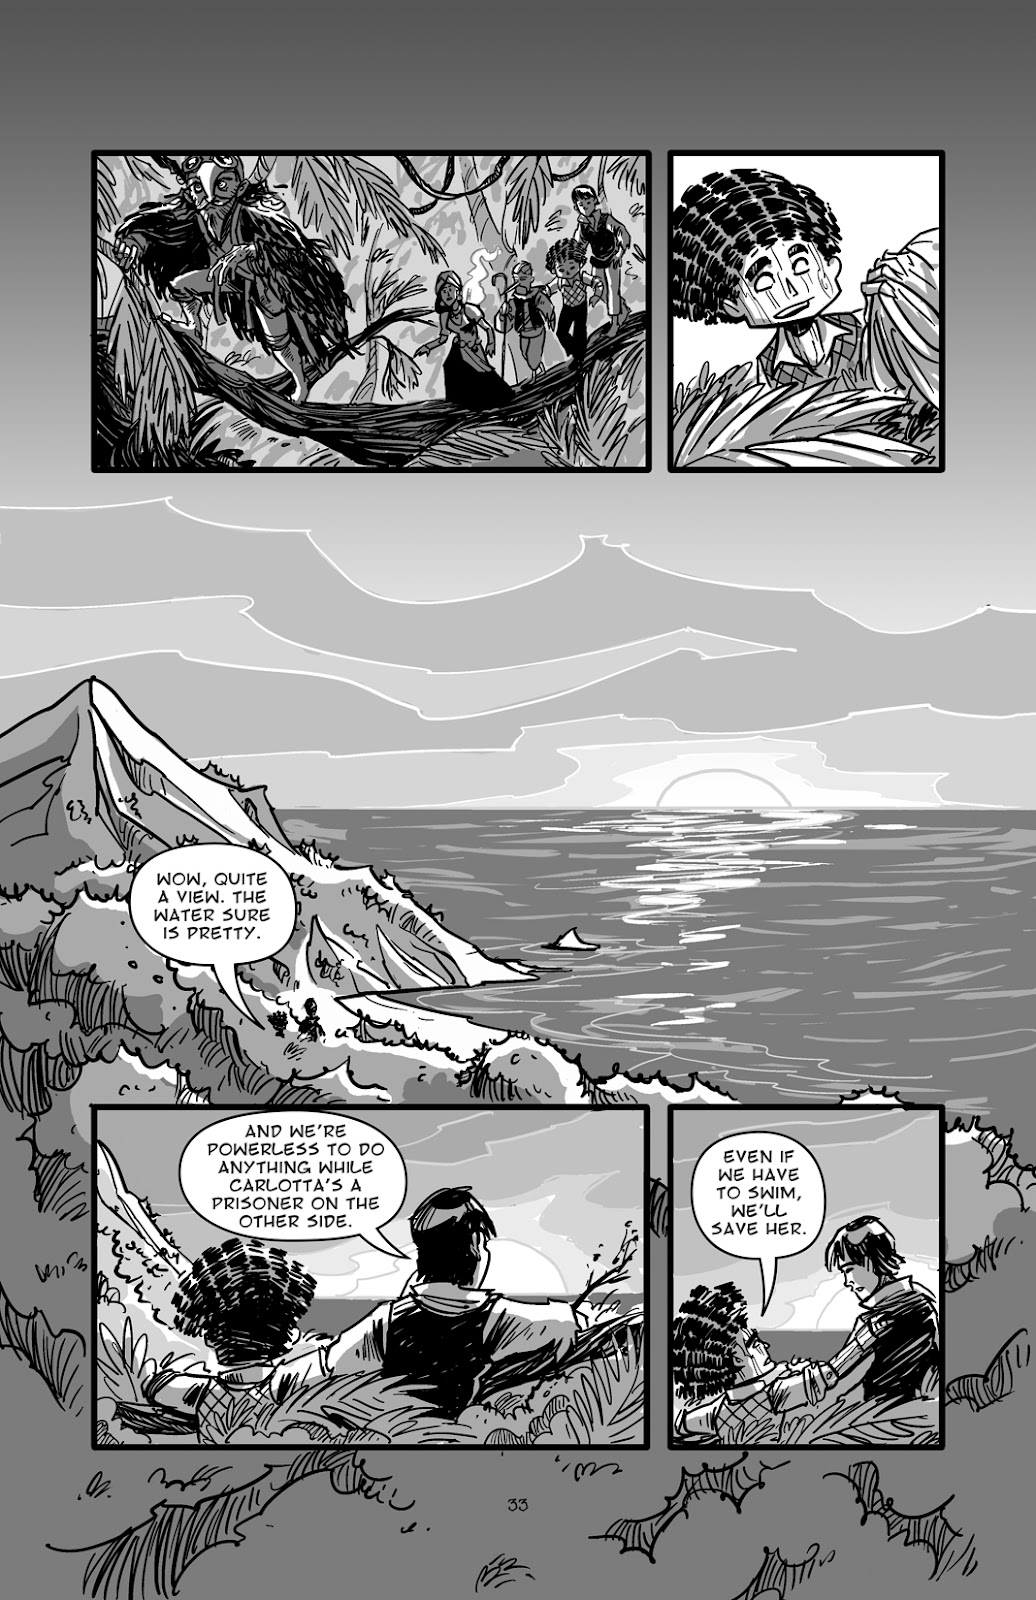 Pinocchio: Vampire Slayer - Of Wood and Blood issue 2 - Page 8